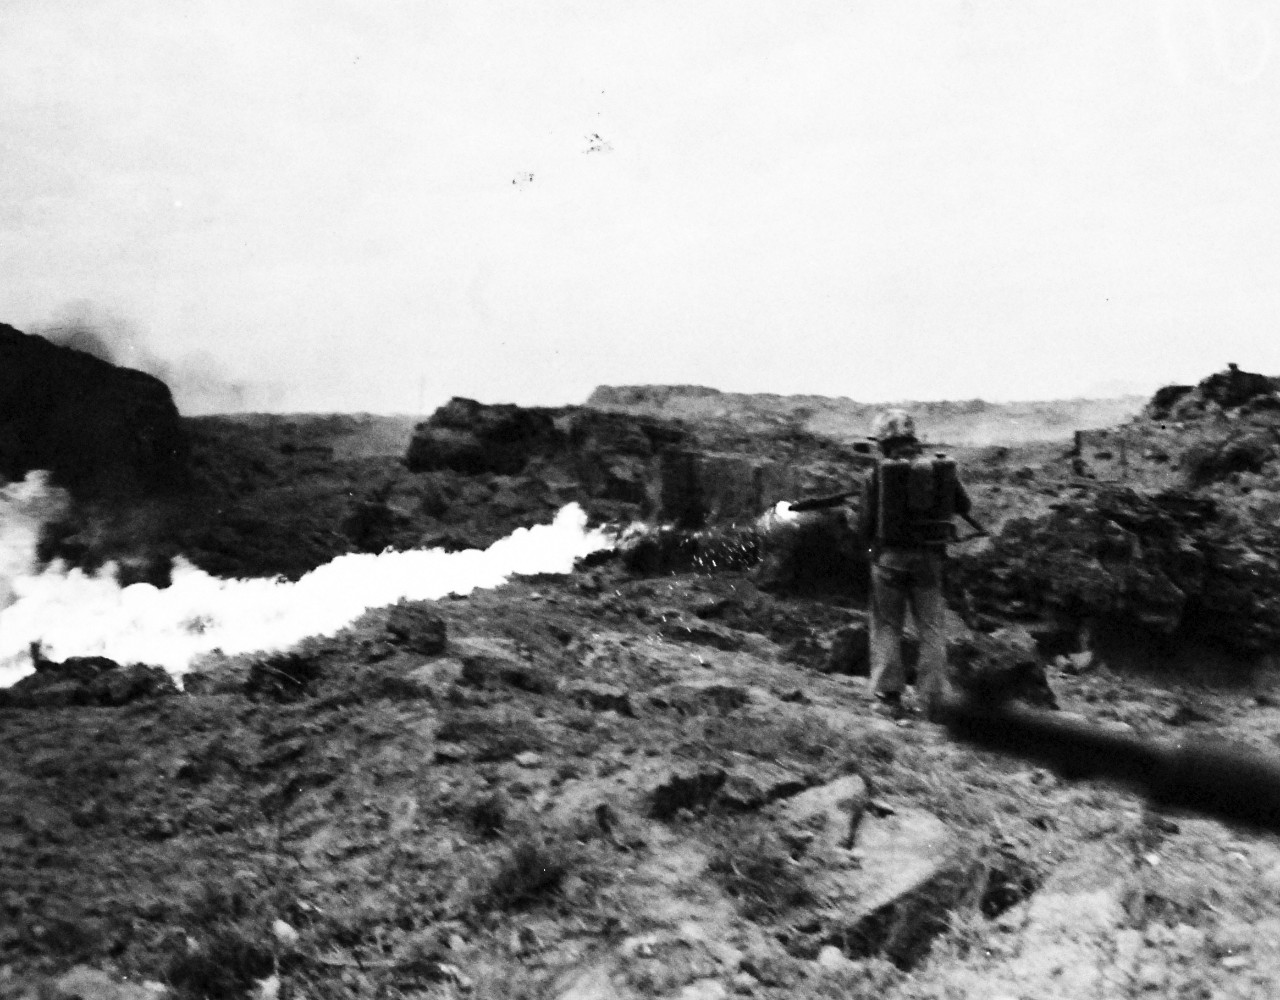 127-GW-320-114786:  Iwo Jima Operations, Feb-March 1945.   Sergeant Leonard J. Shoemaker, Newberry, Michigan, uses his flame thrower on Japanese caves in mopping up operation on Iwo Jima. Photographed by Simpson, February 27, 1945.   Official U.S. Marine Corps Photograph, now in the collections of the National Archives.  (2016/09/06).